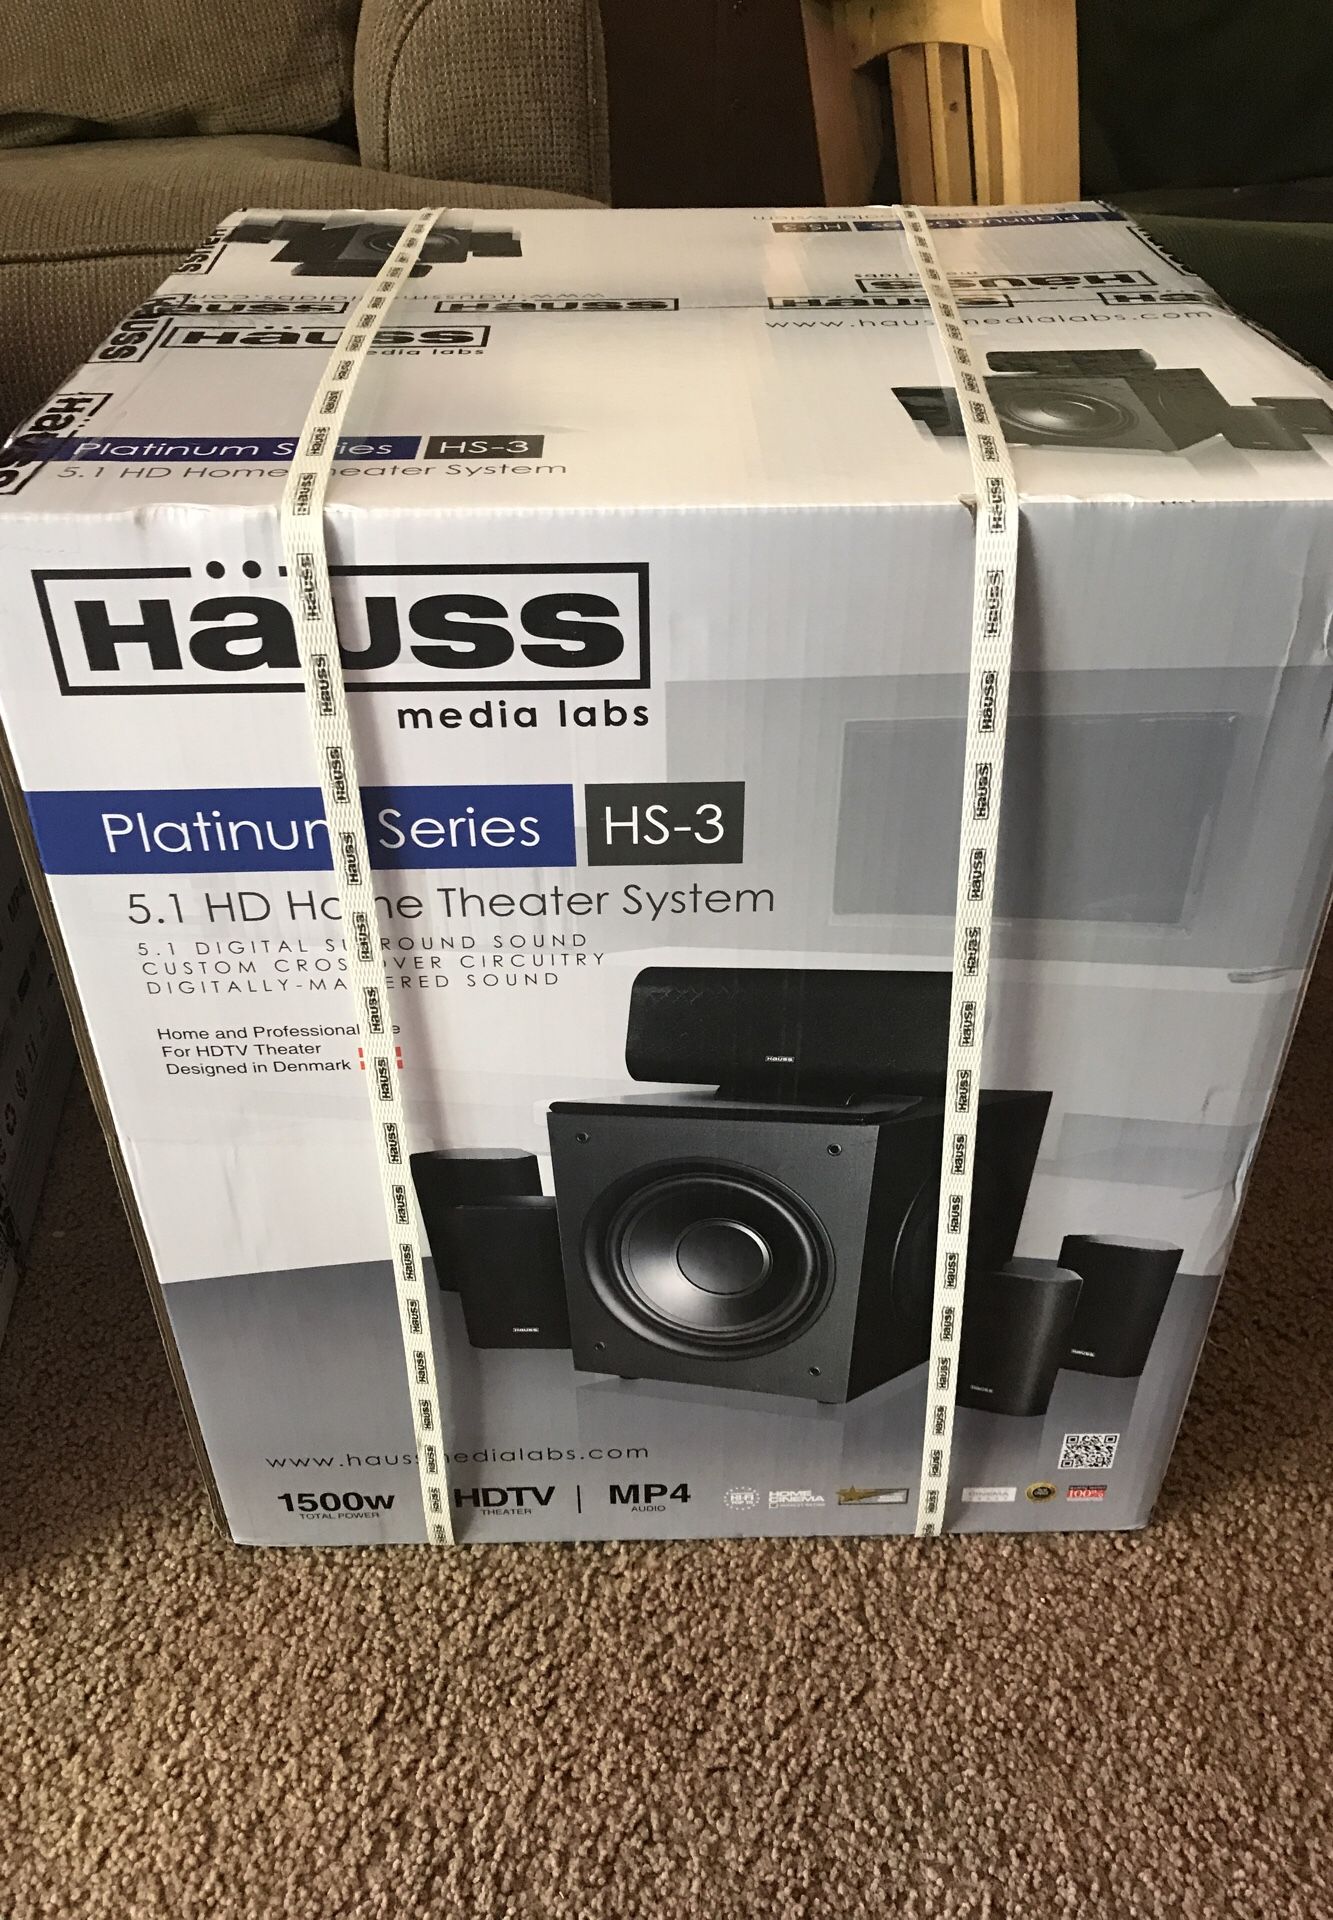 Excellent home theater speakers